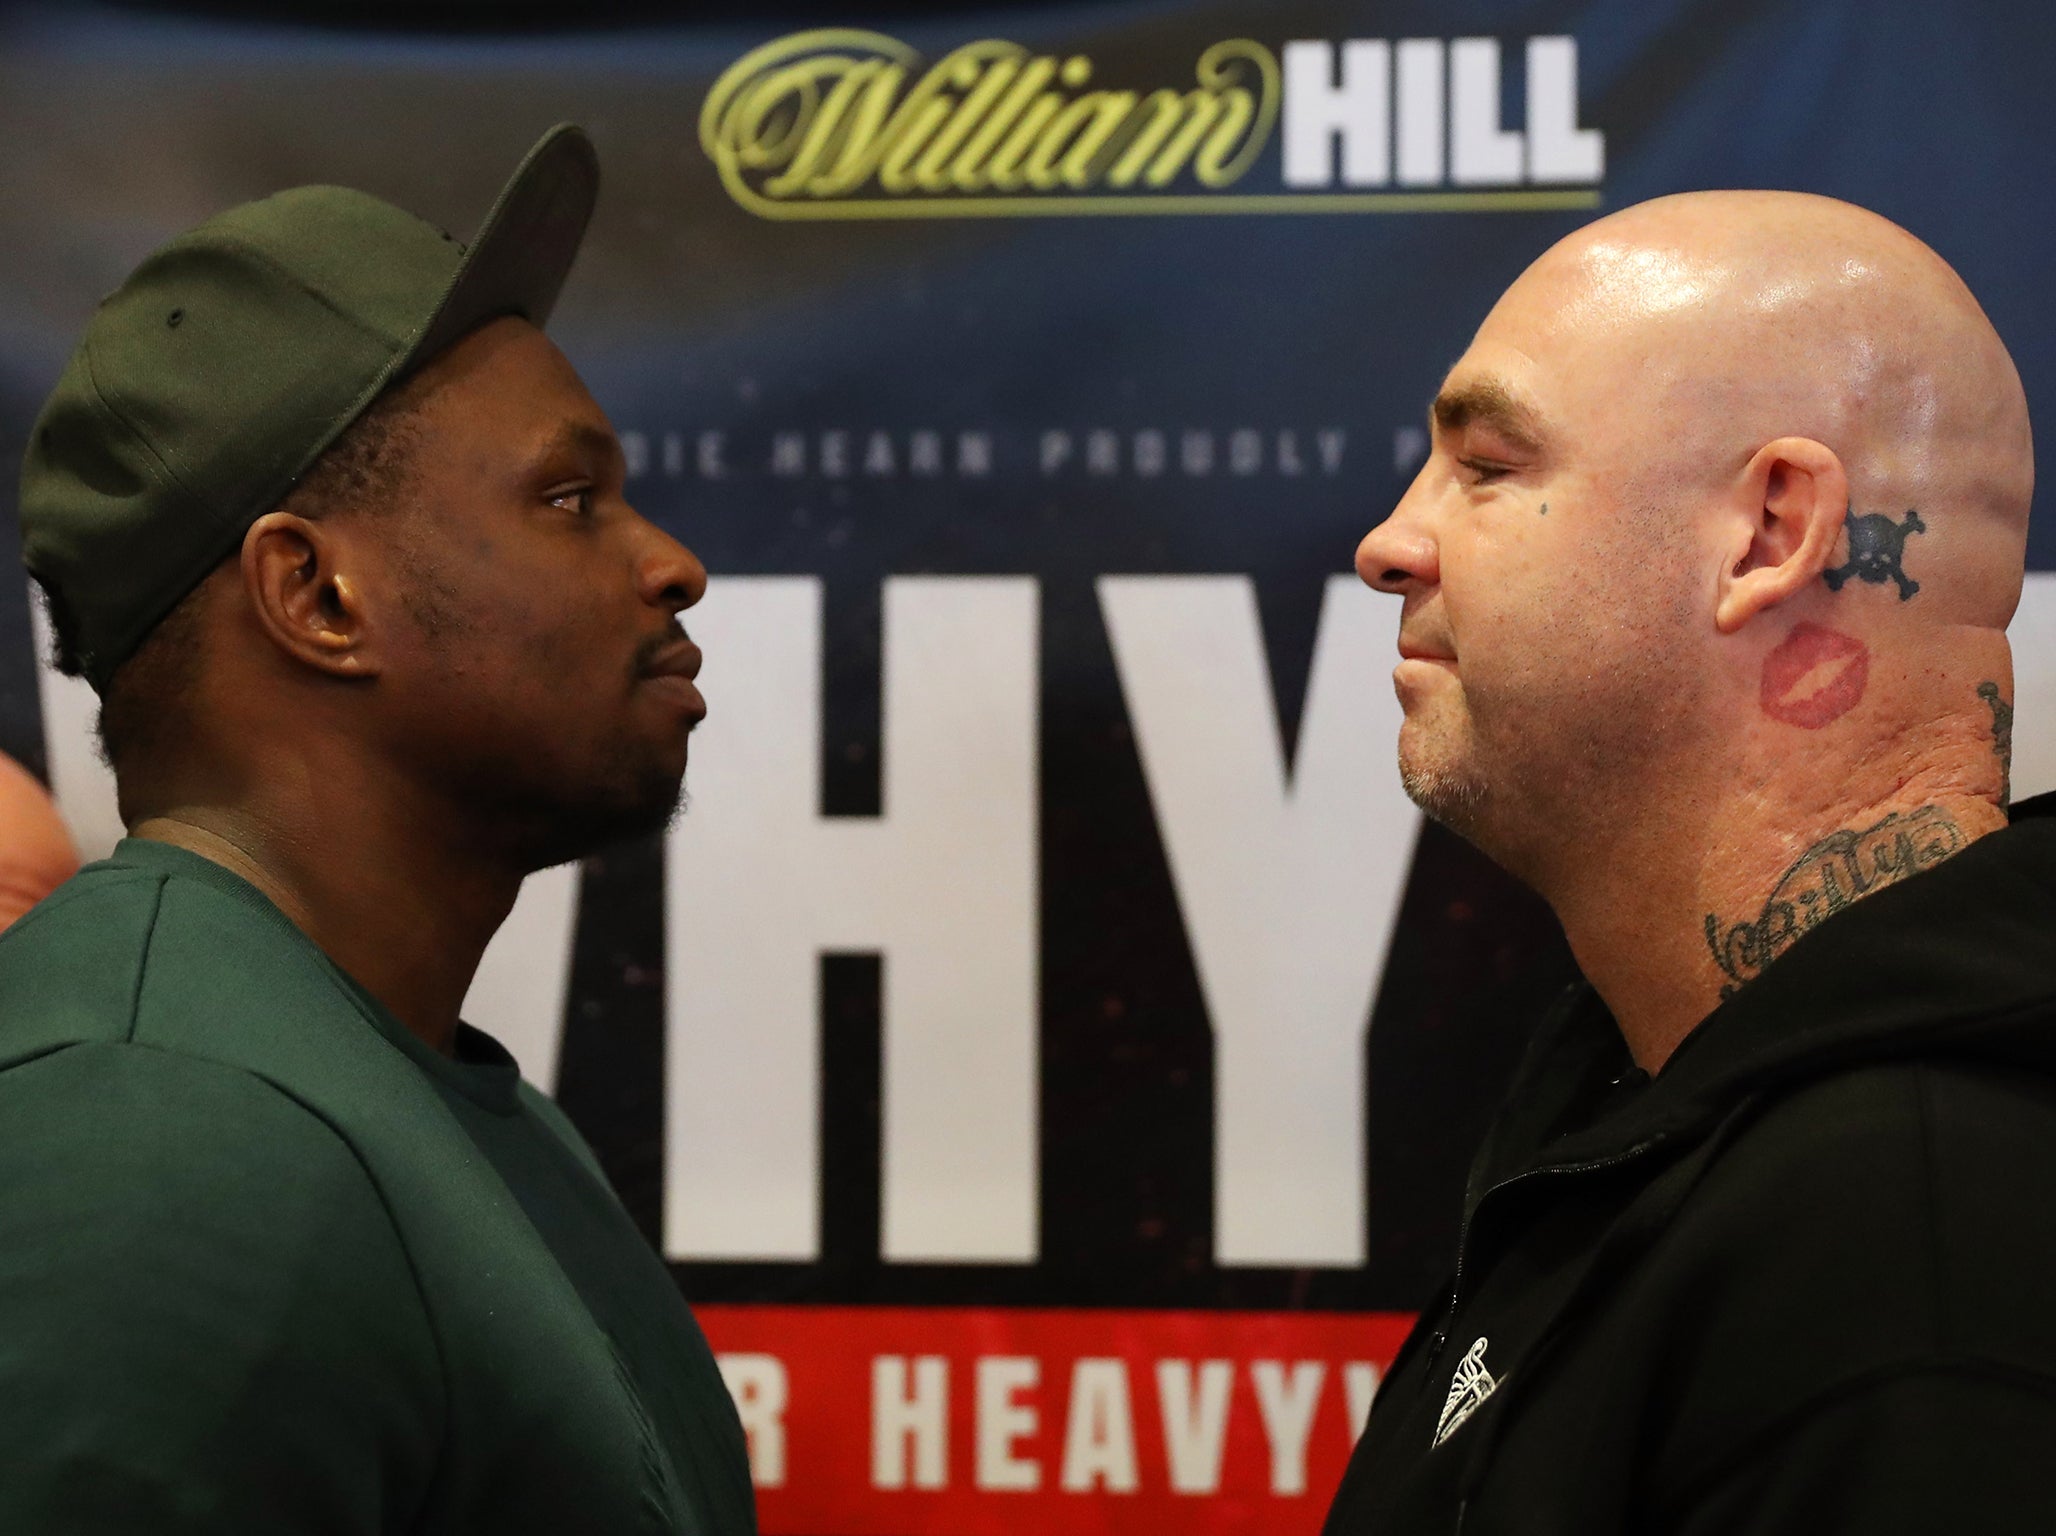 Dillian Whyte and Lucas Browne fight this weekend